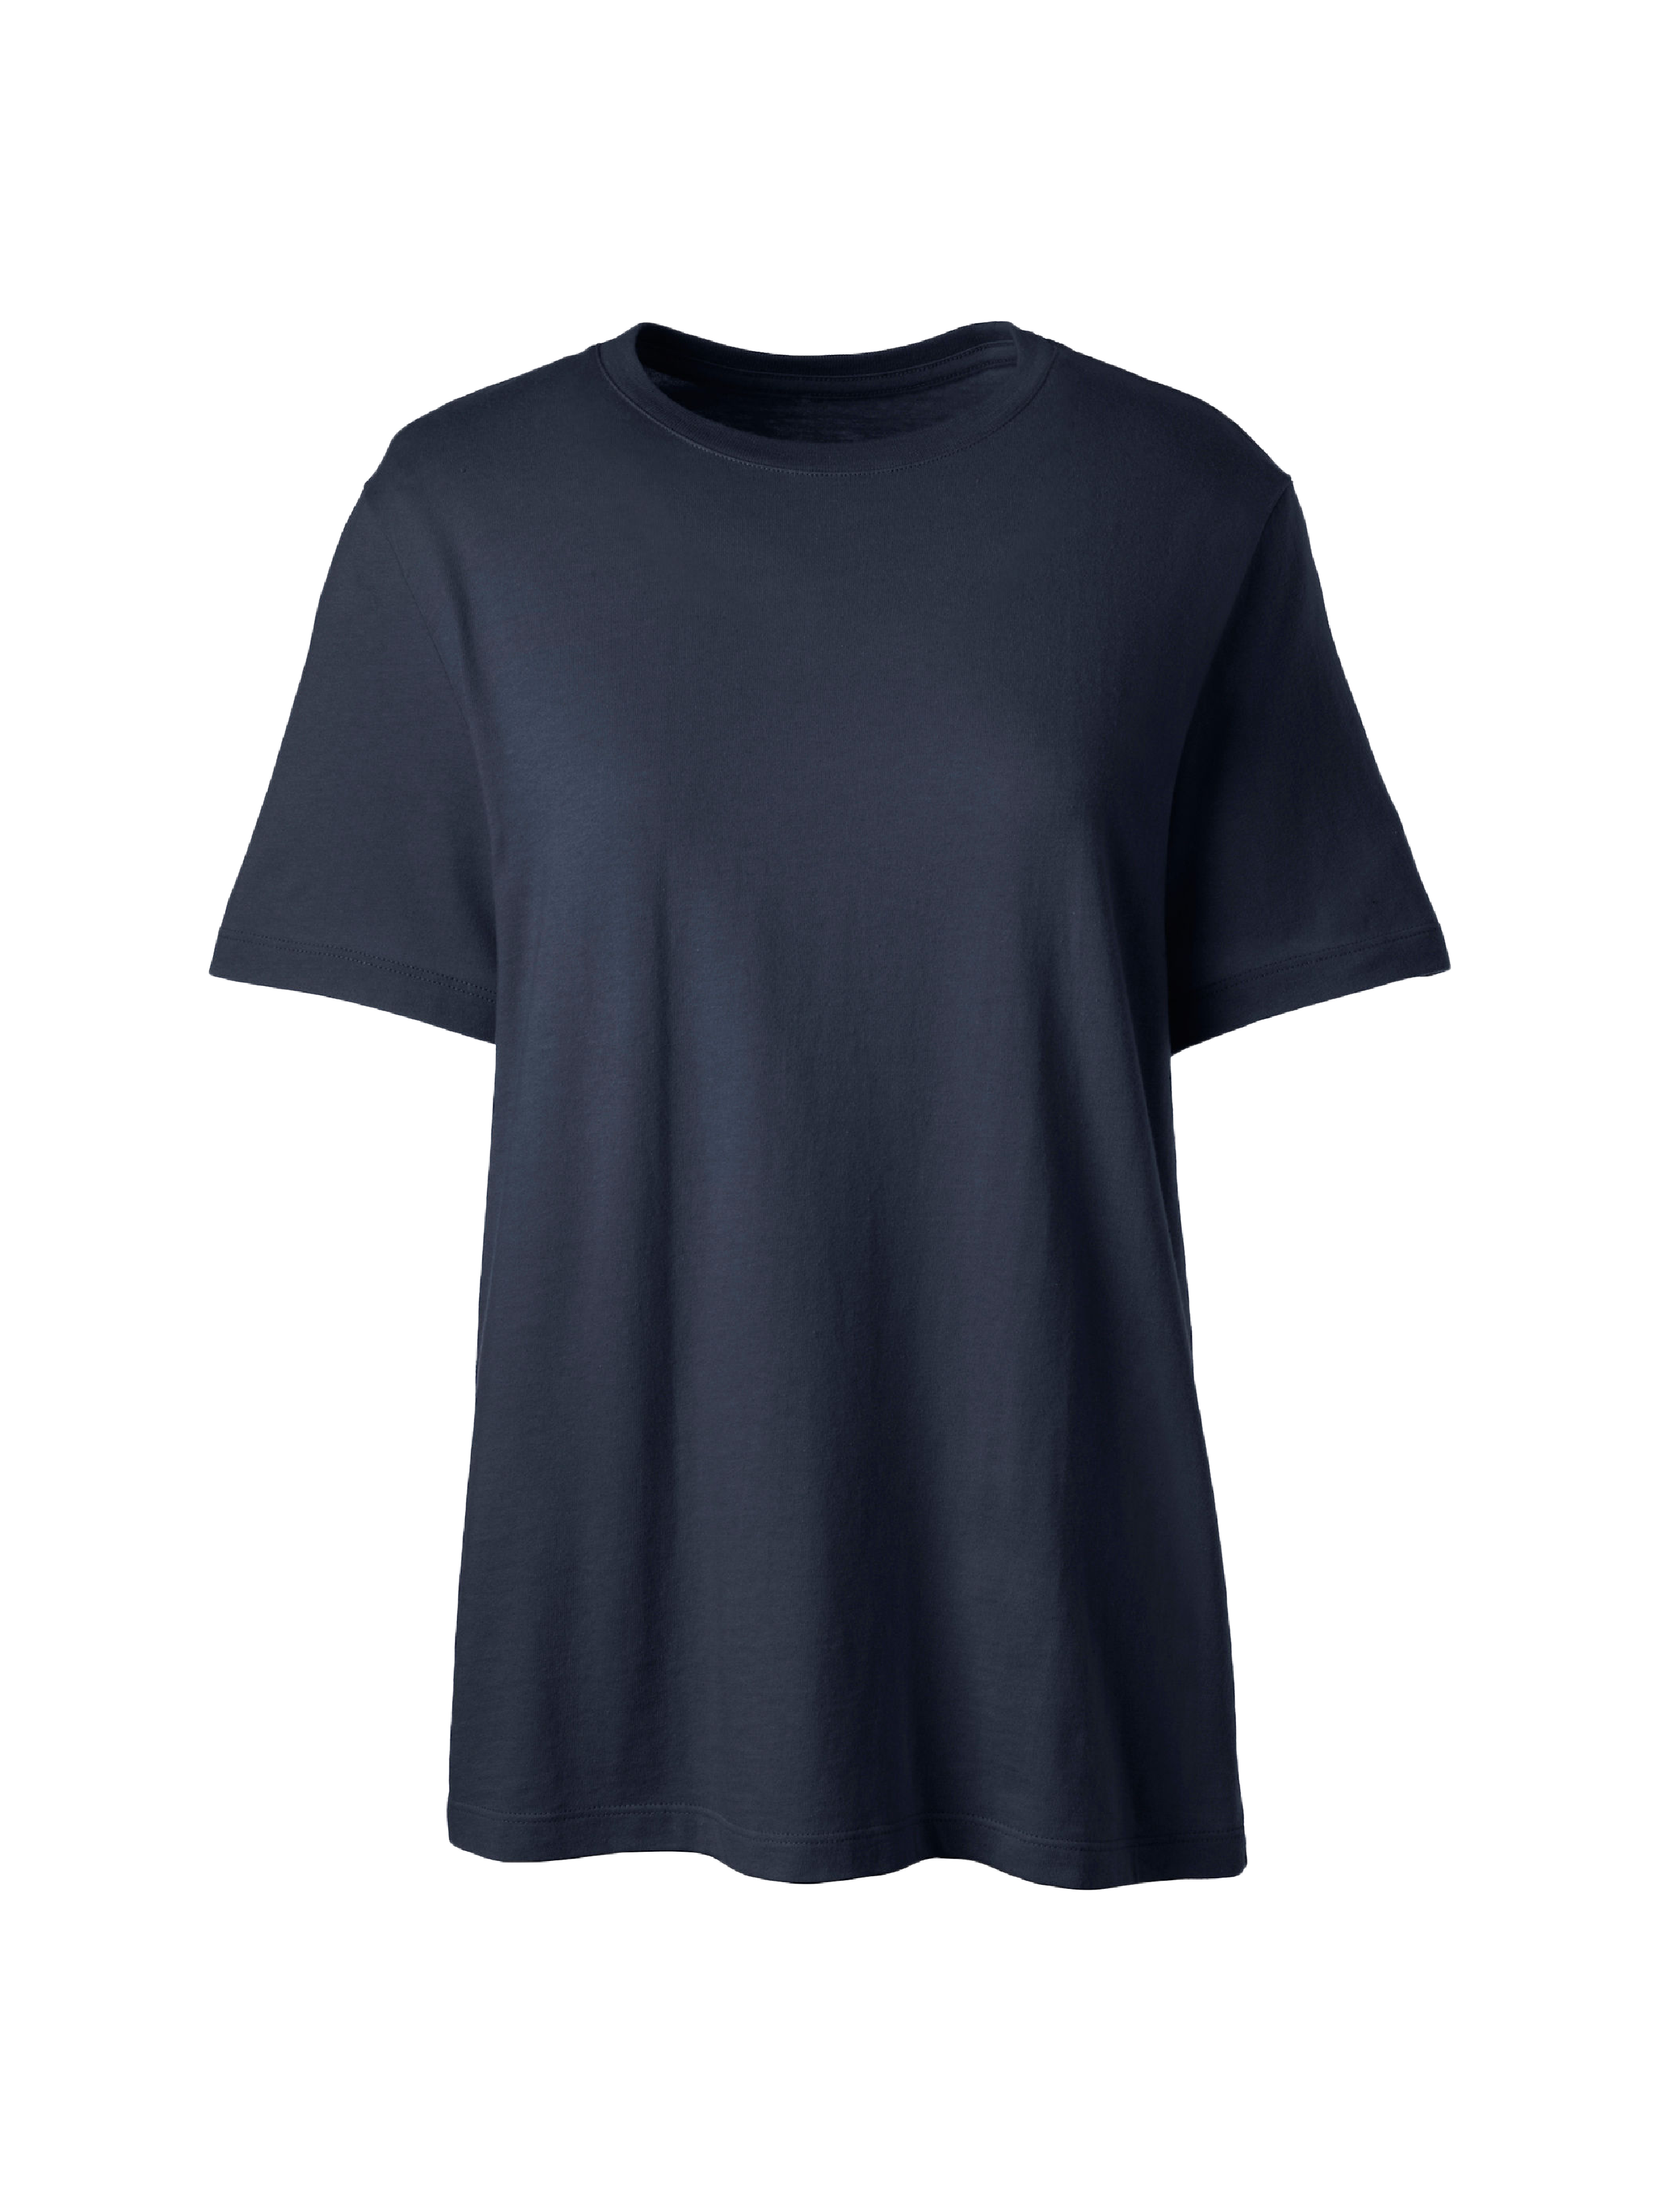 navy blue-01.png